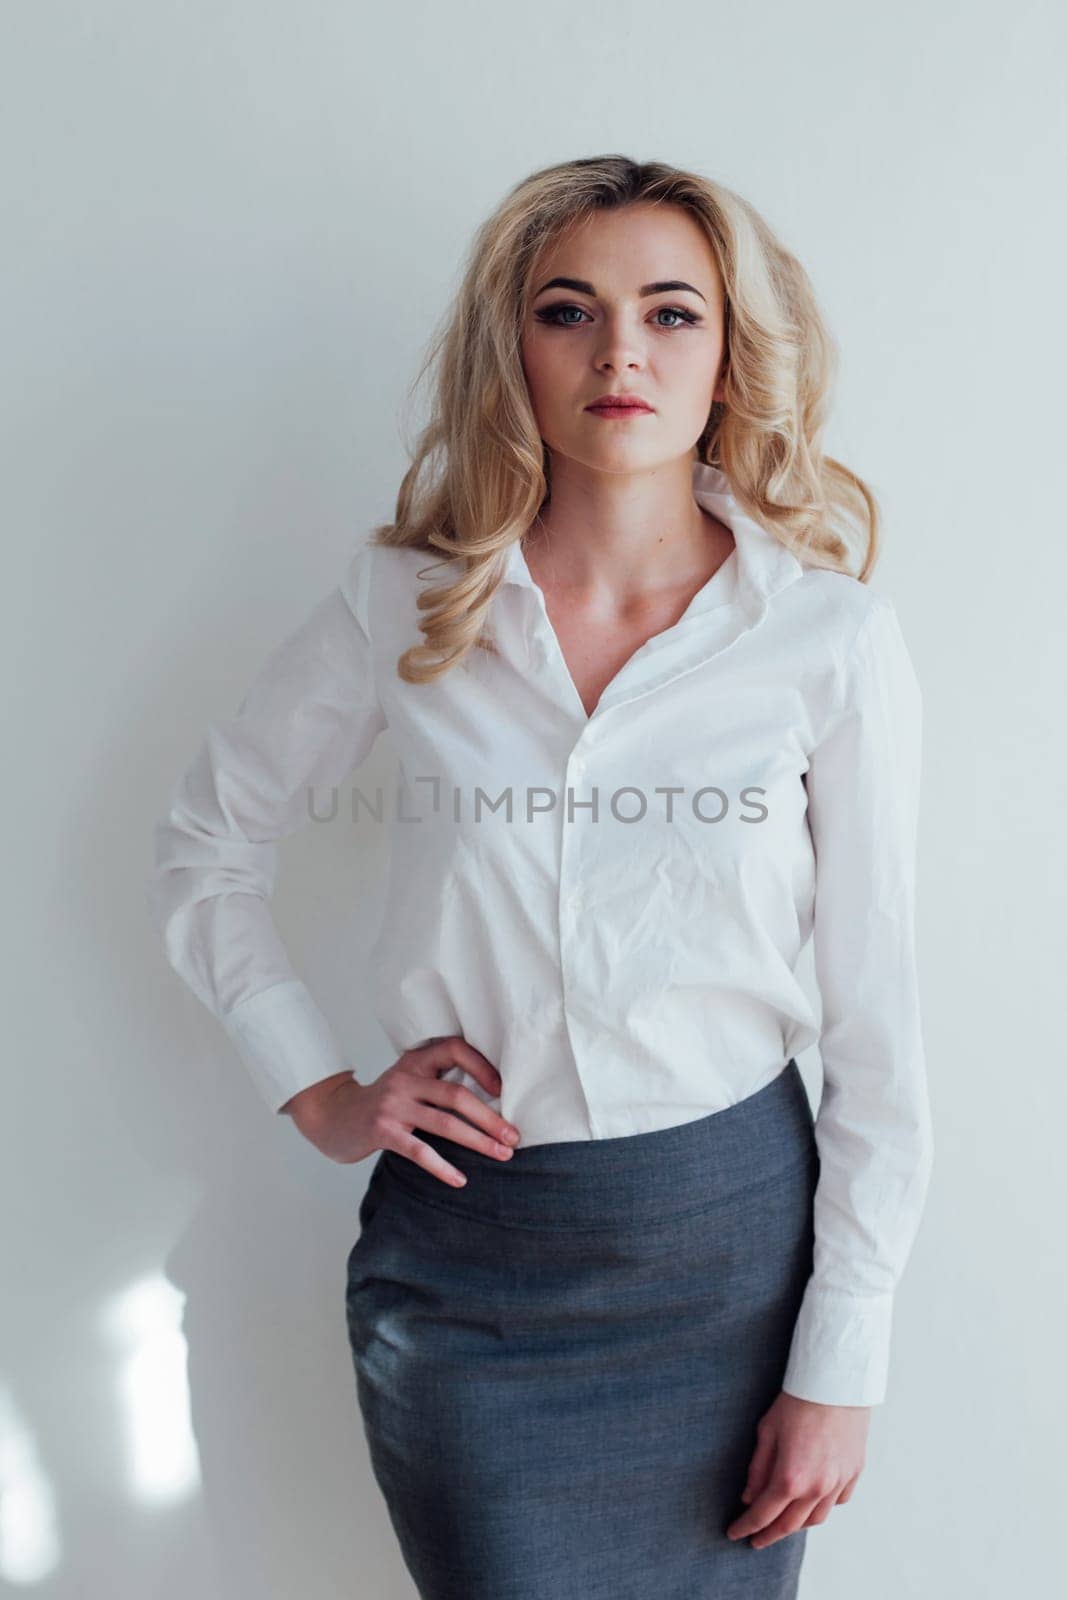 Portrait of business woman in business suit by Simakov